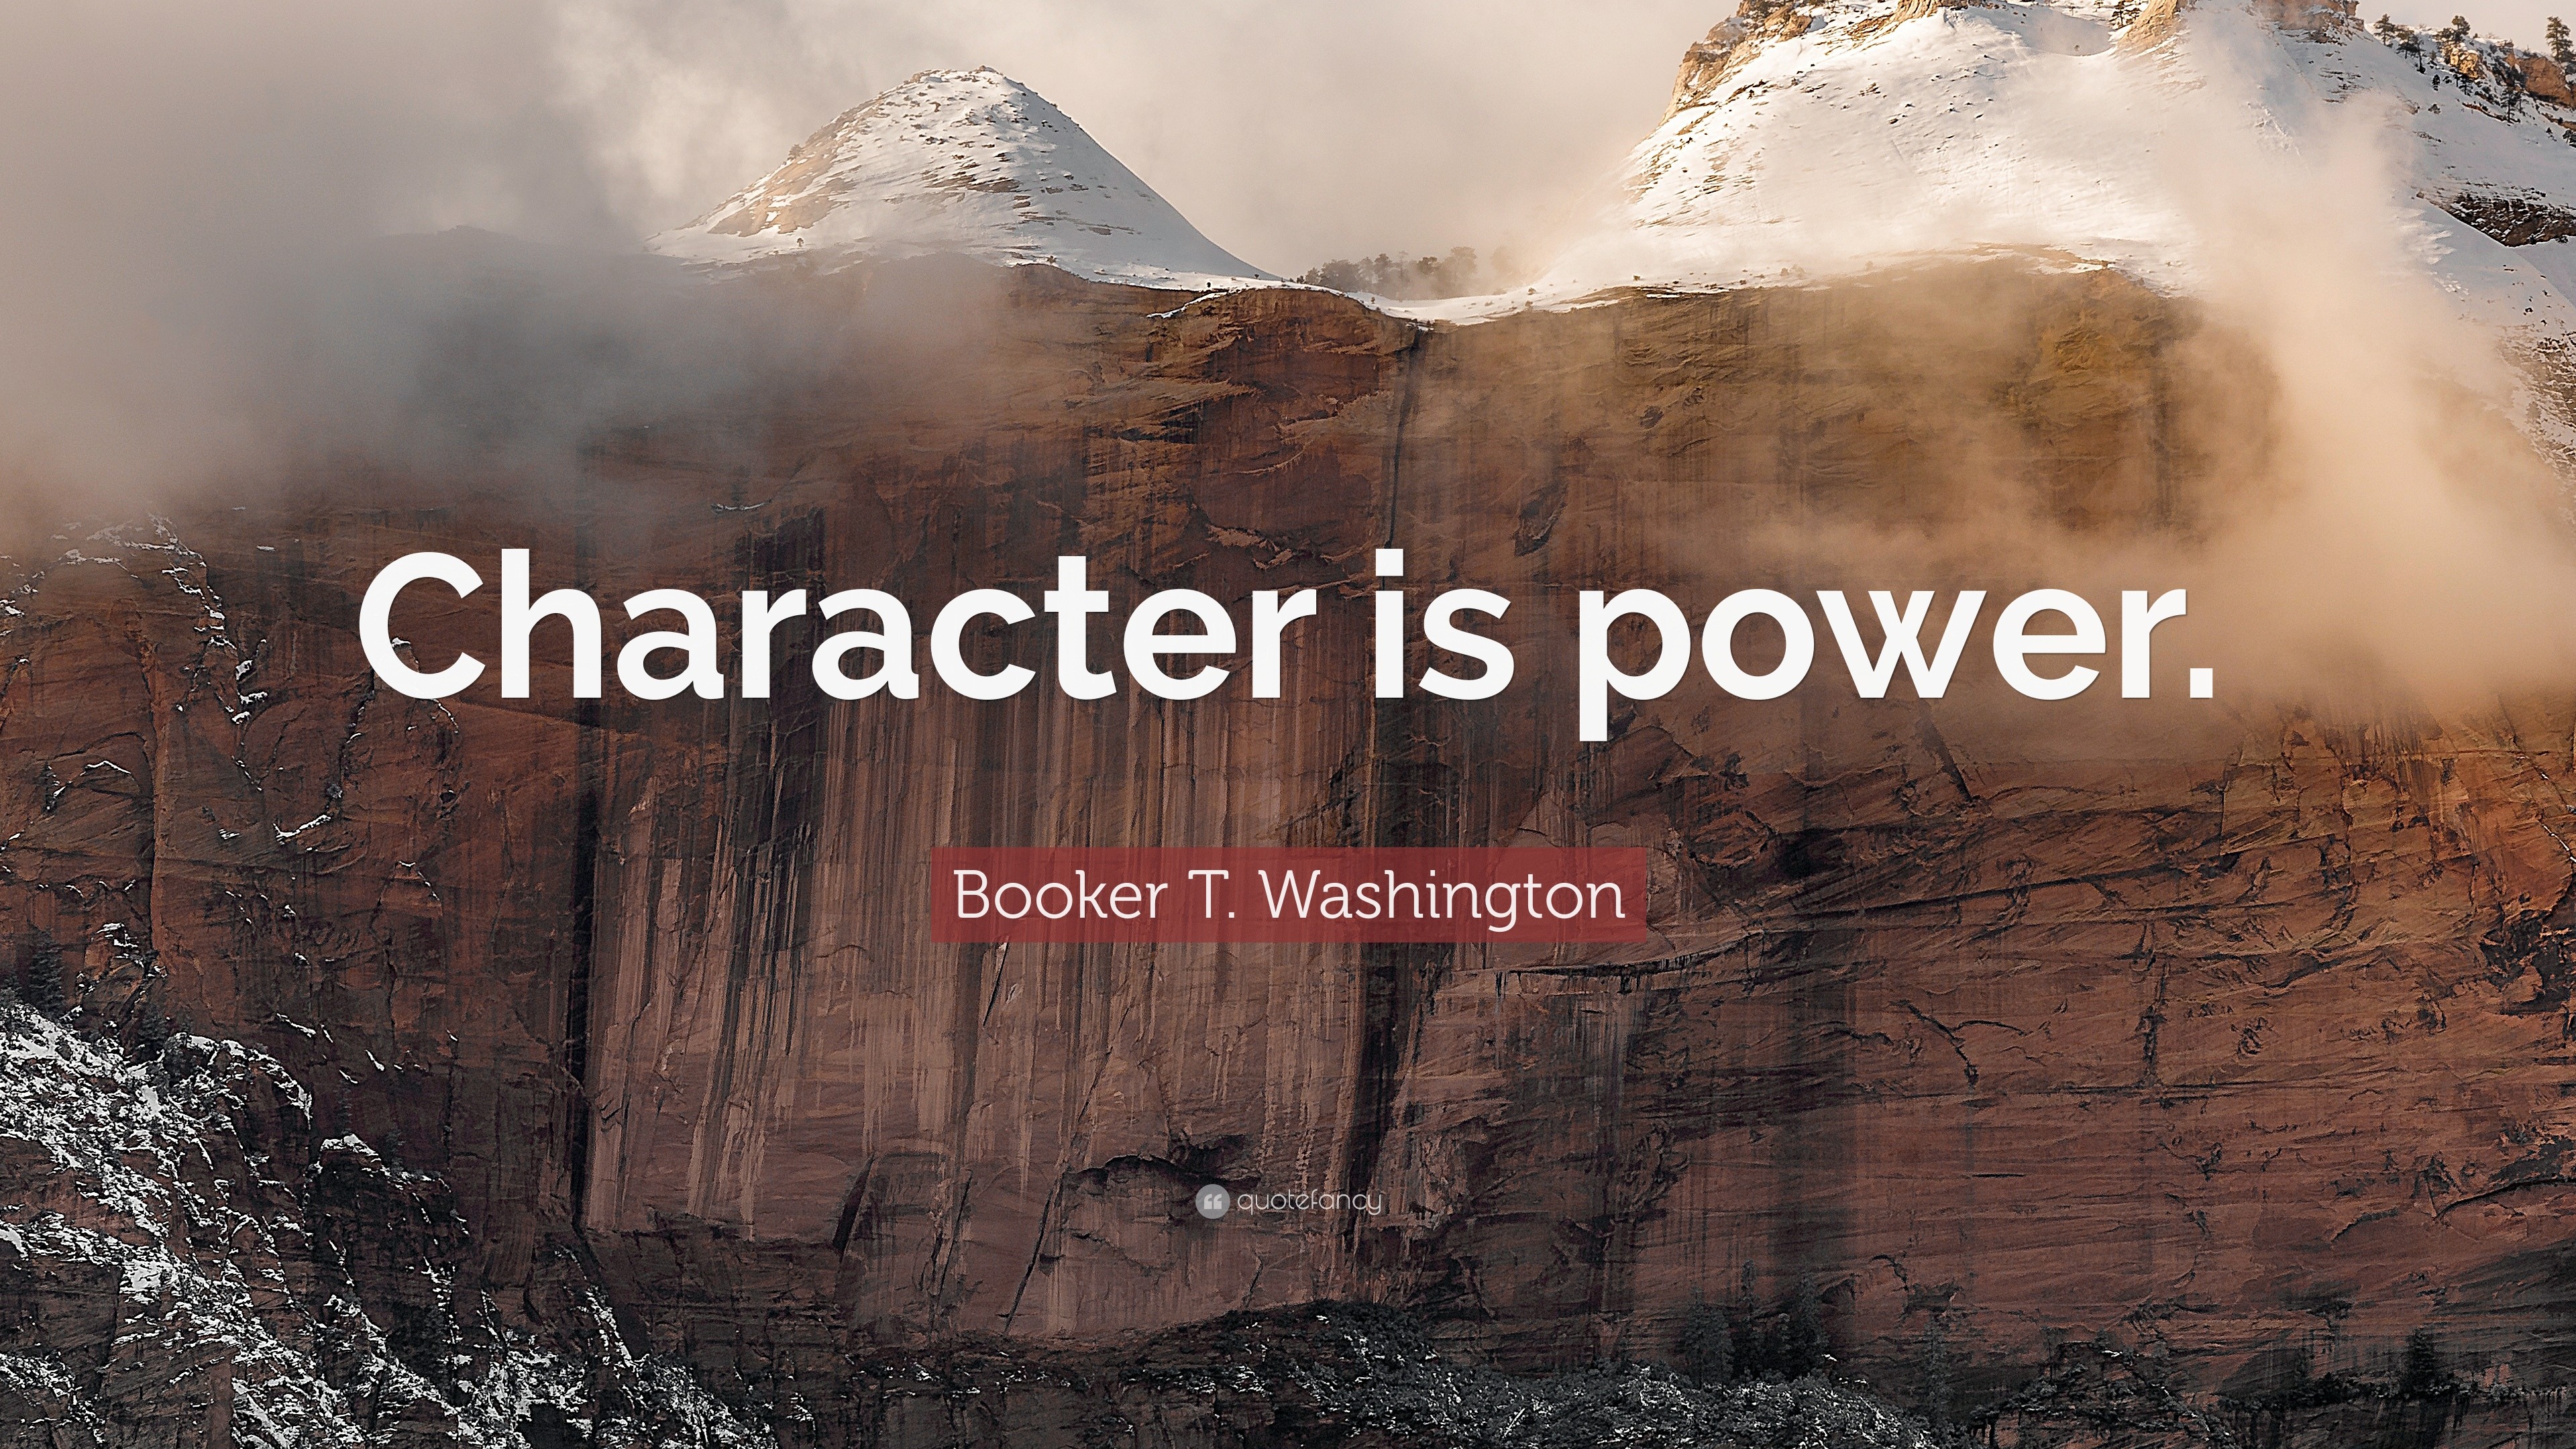 Washington Quote "Character is Power" Poster Motivational Print 12x18 Details about   Booker T 